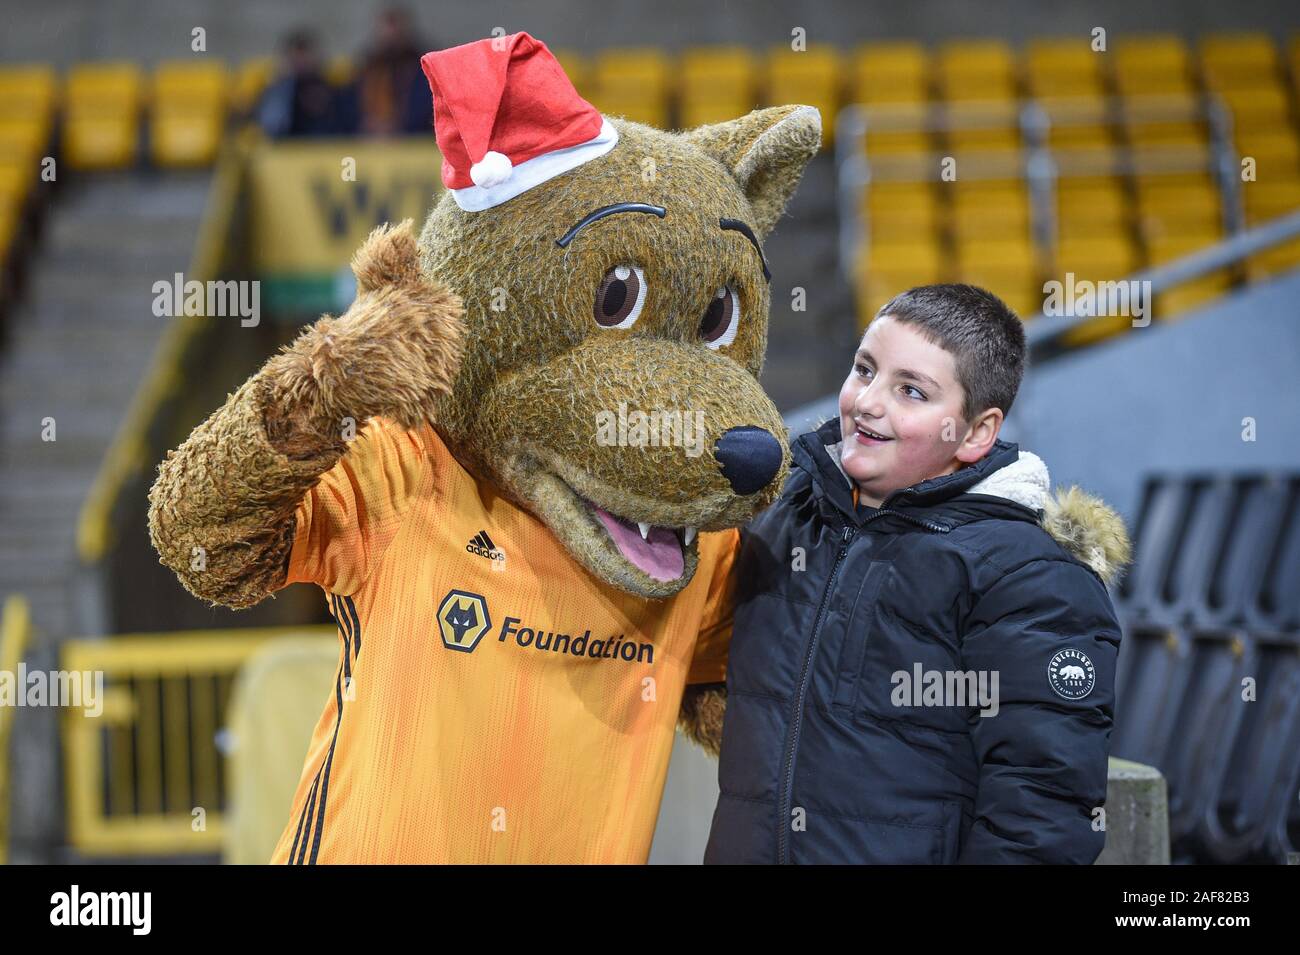 12th December 2019, Molineux, Wolverhampton, England; UEFA Europa League, Wolverhampton Wanderers v Besiktas : A young fan with the Wolves mascot  Credit: Richard Long/News Images Stock Photo